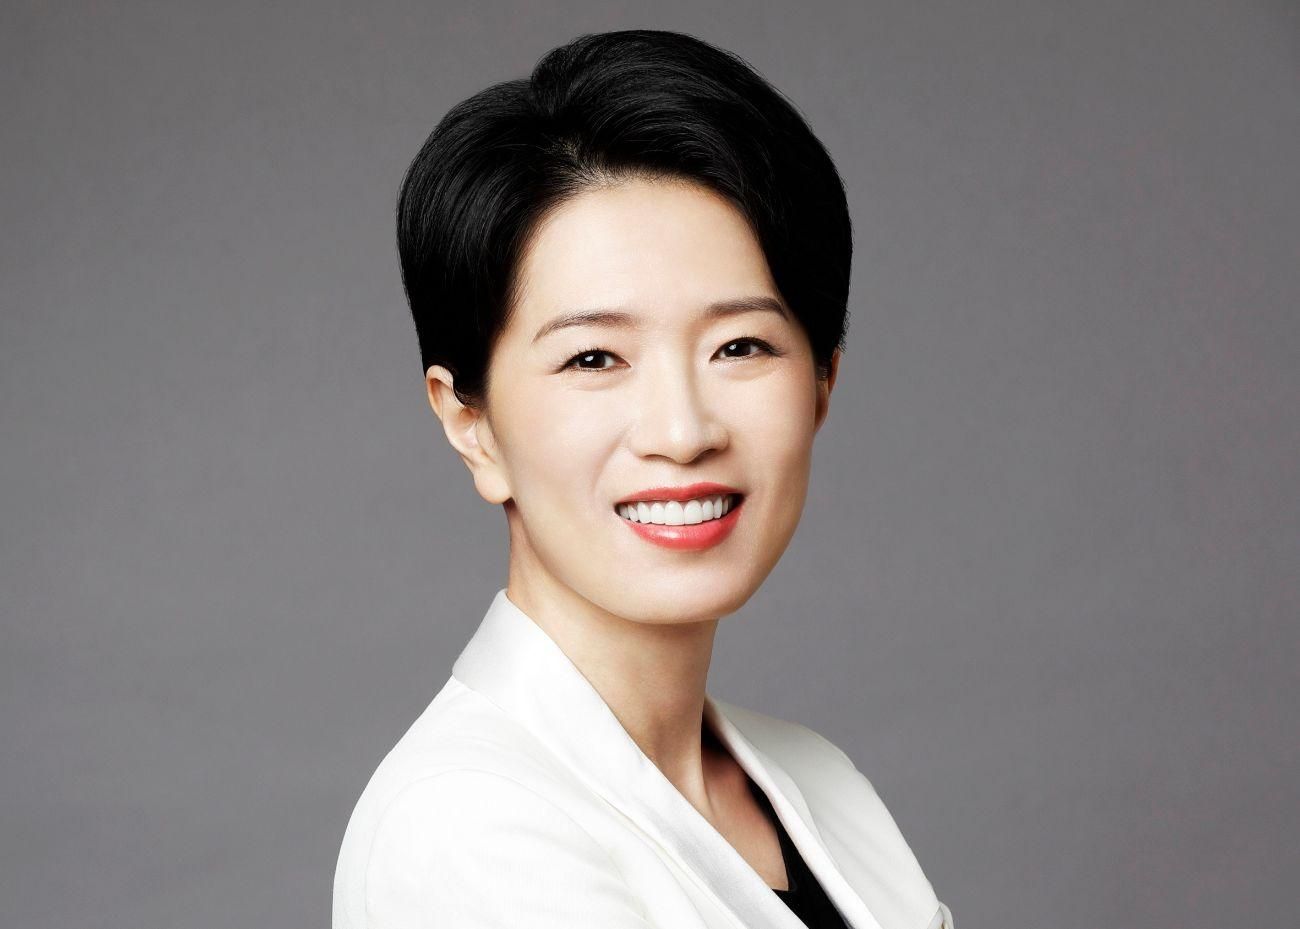 Rachel Duan - Independent director at the Board of Directors of Sanofi and Member of the Compensation Committee